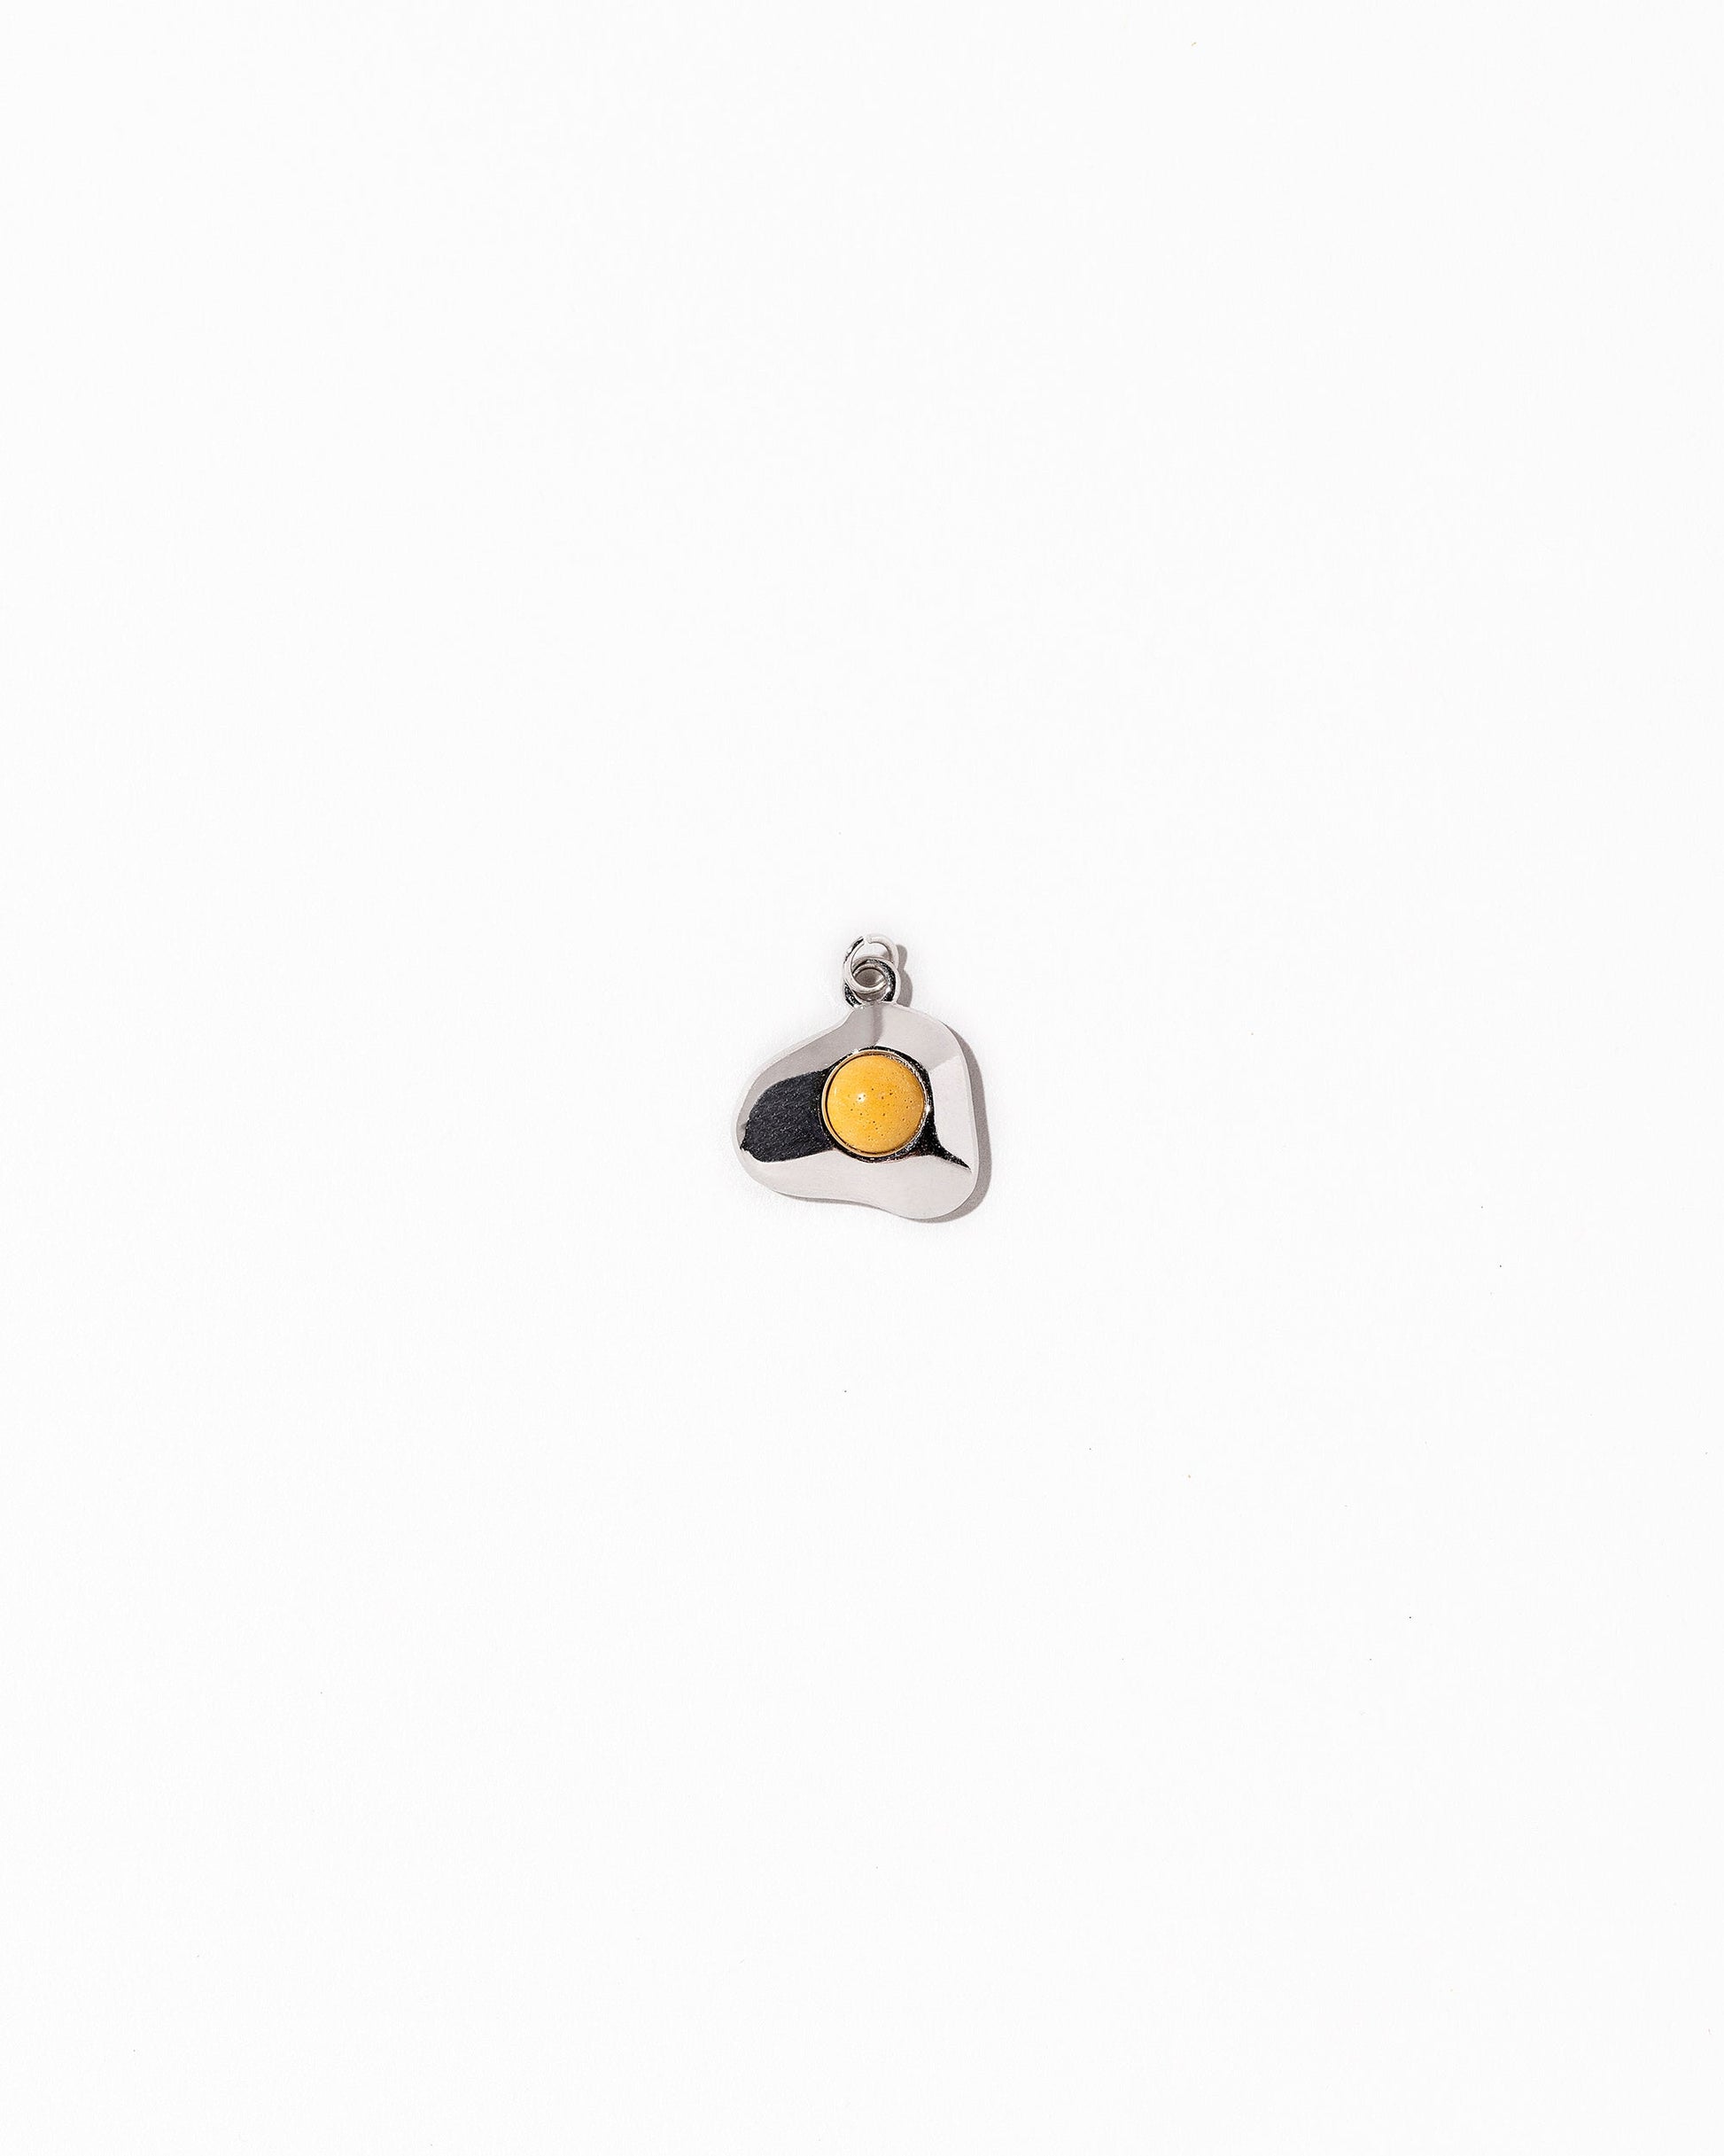 Sunny Side Up Egg Charm Eight on light colored background.